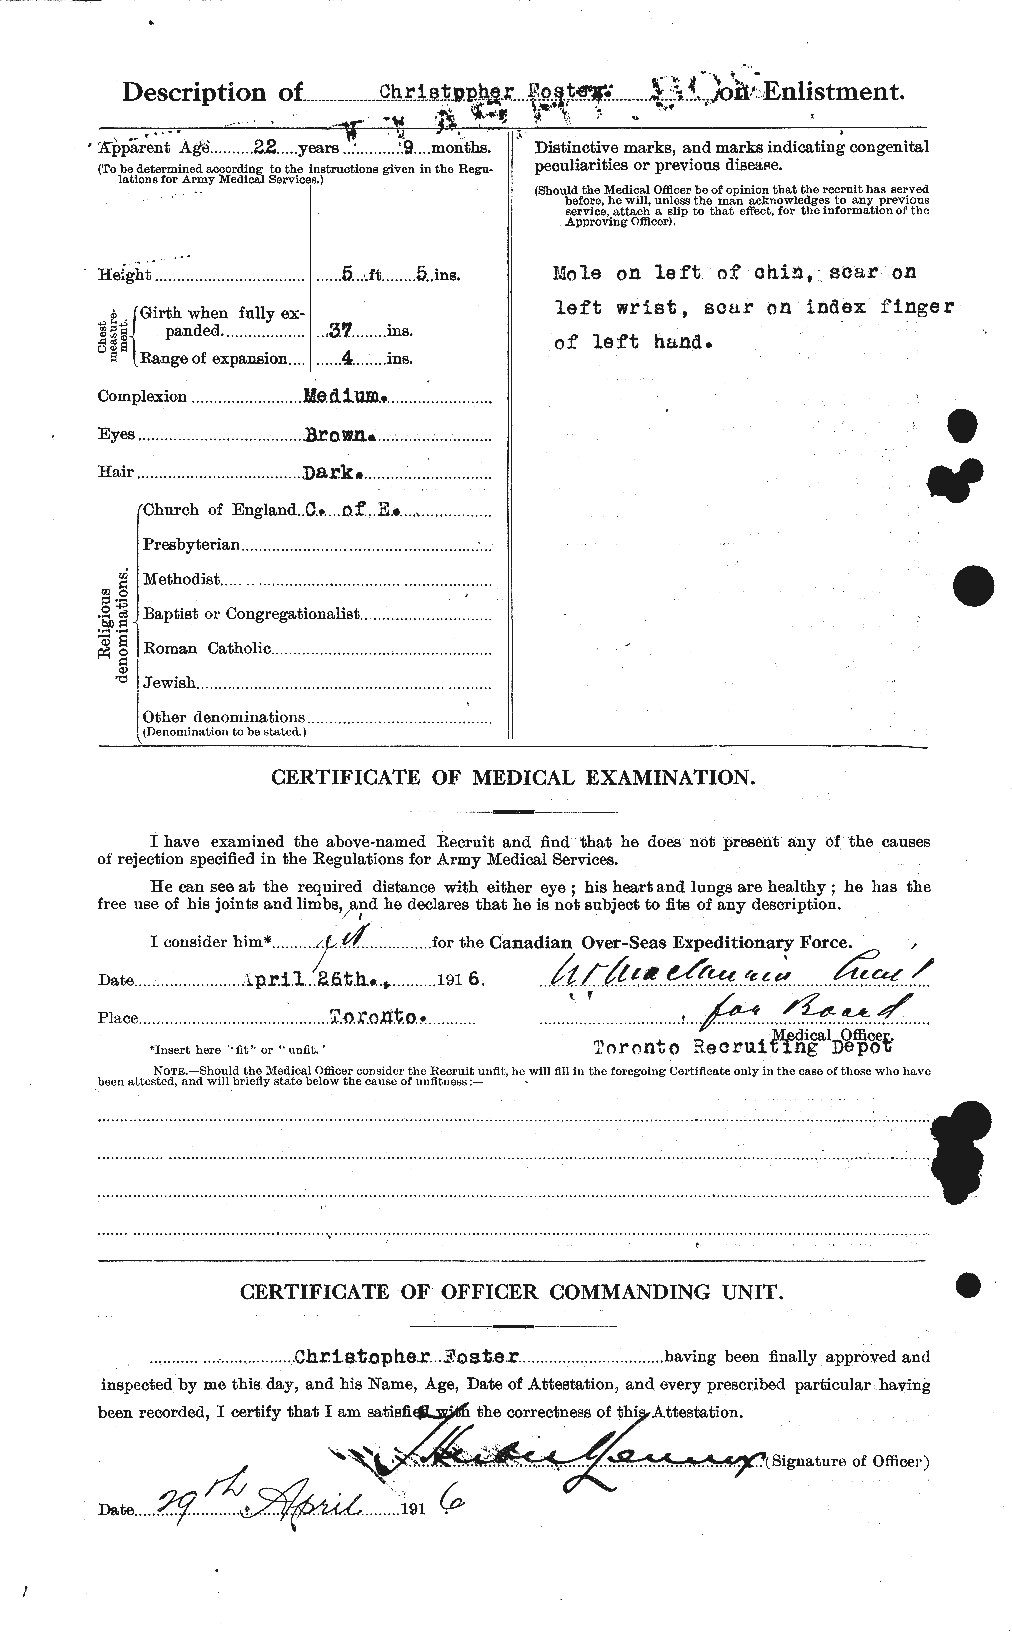 Personnel Records of the First World War - CEF 330530b